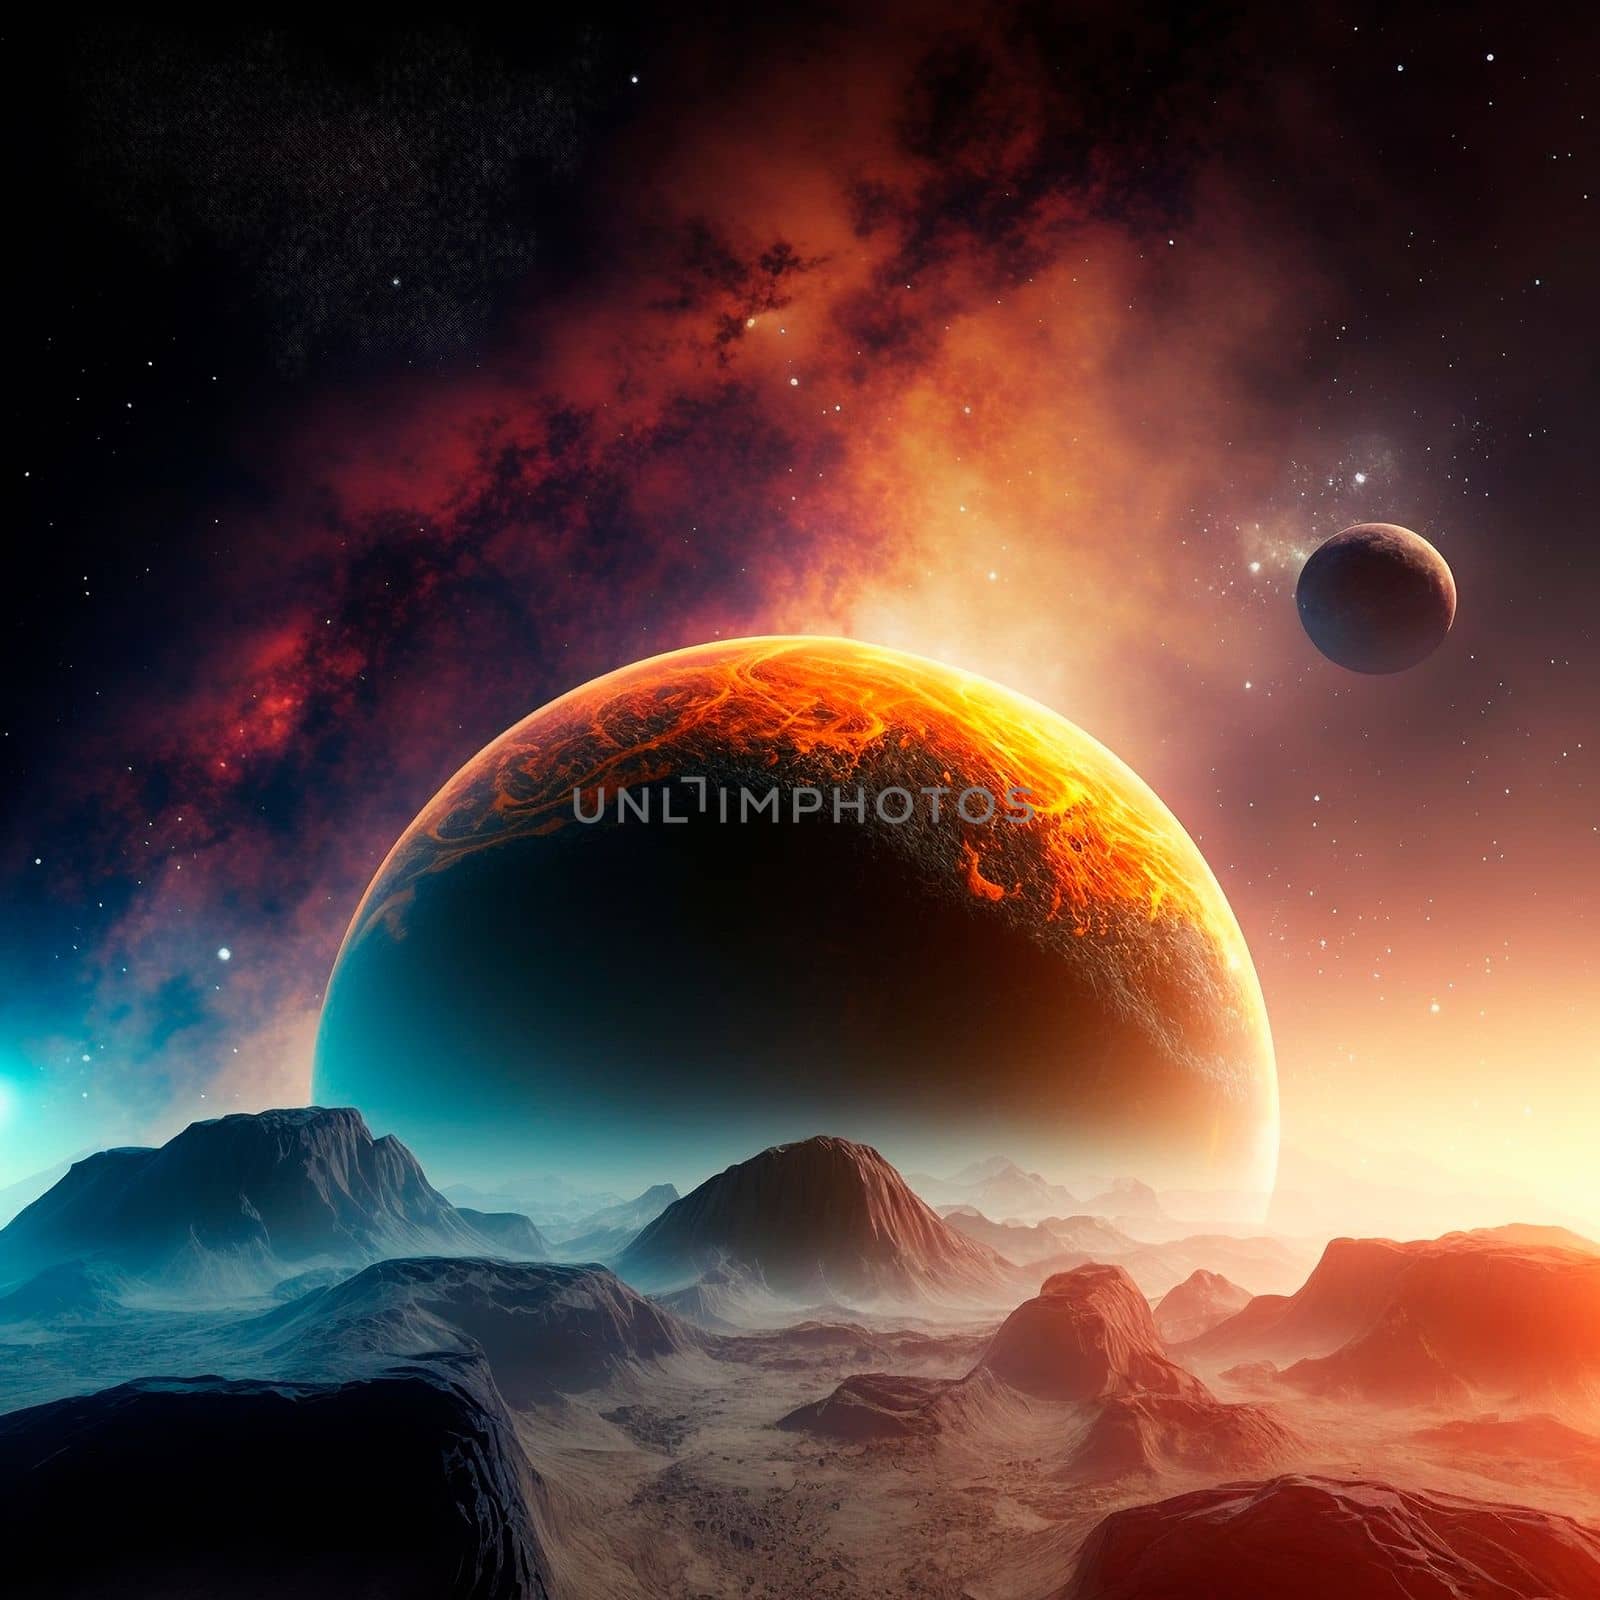 An unexplored planet in the sky by NeuroSky